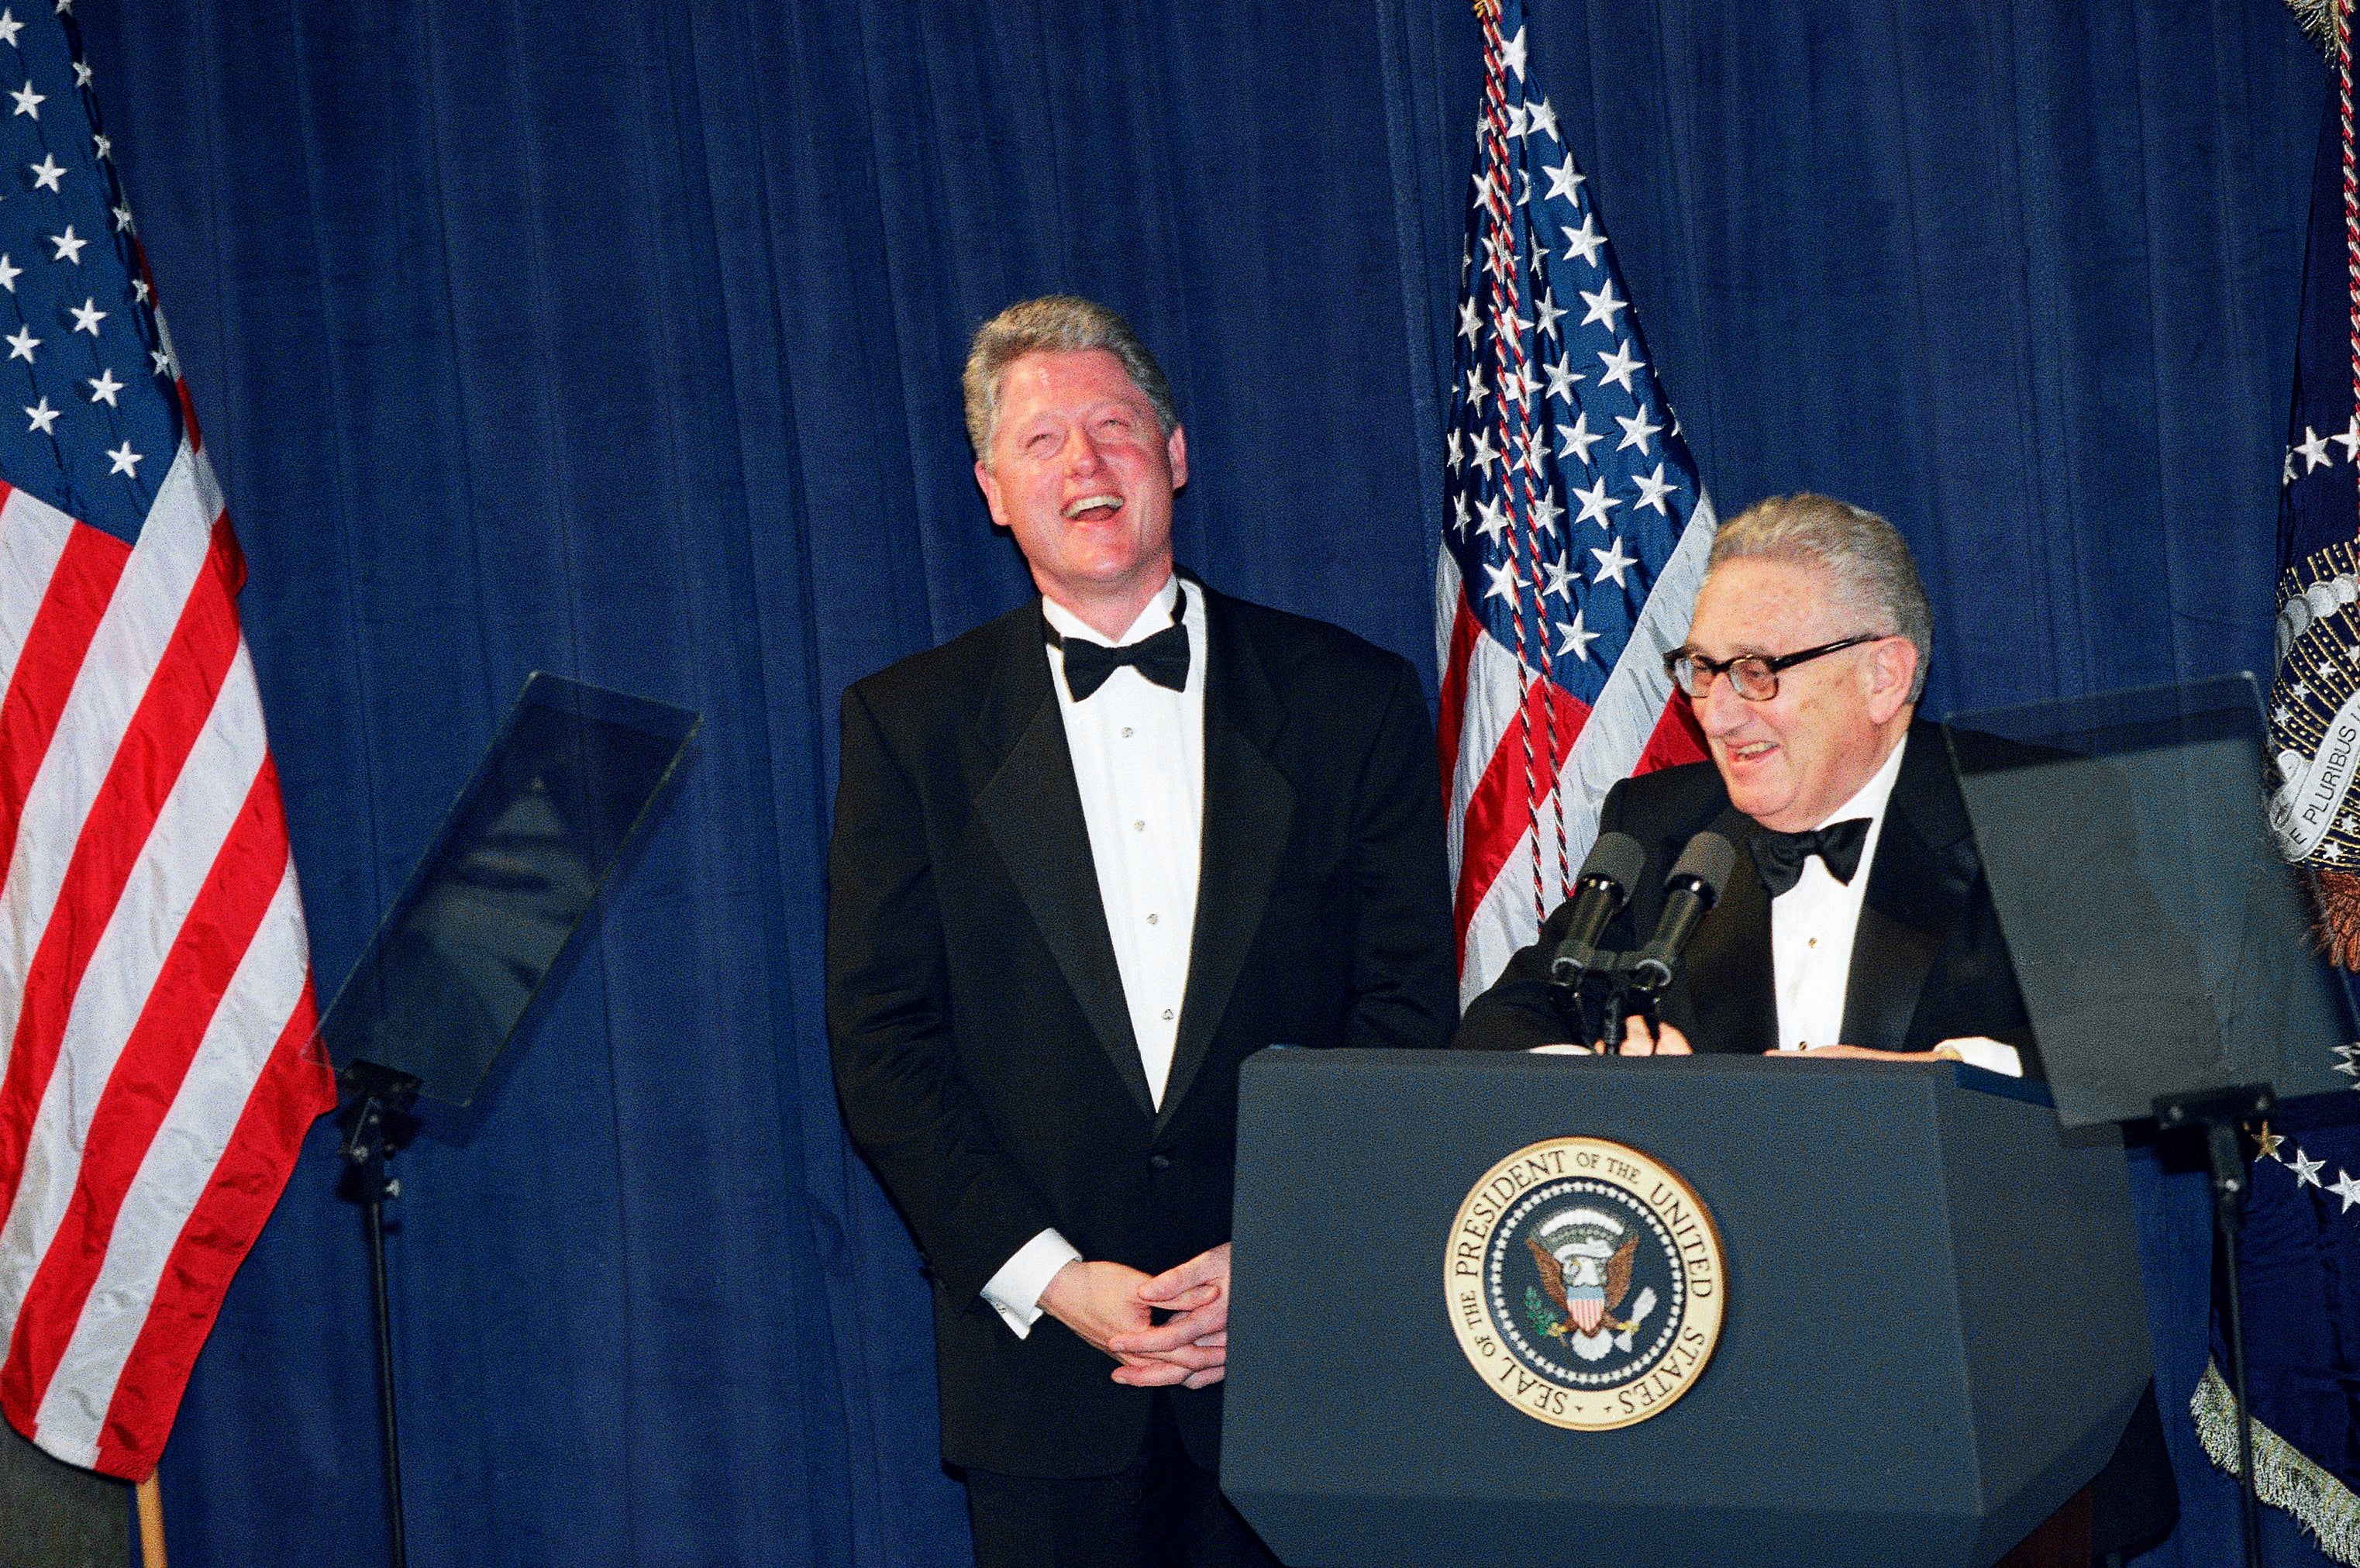 President Bill Clinton, left, and former Secretary of State Henry Kissinger laugh together after Clinton gave the closing remarks at a national policy conference, March 1, 1995, in Washington